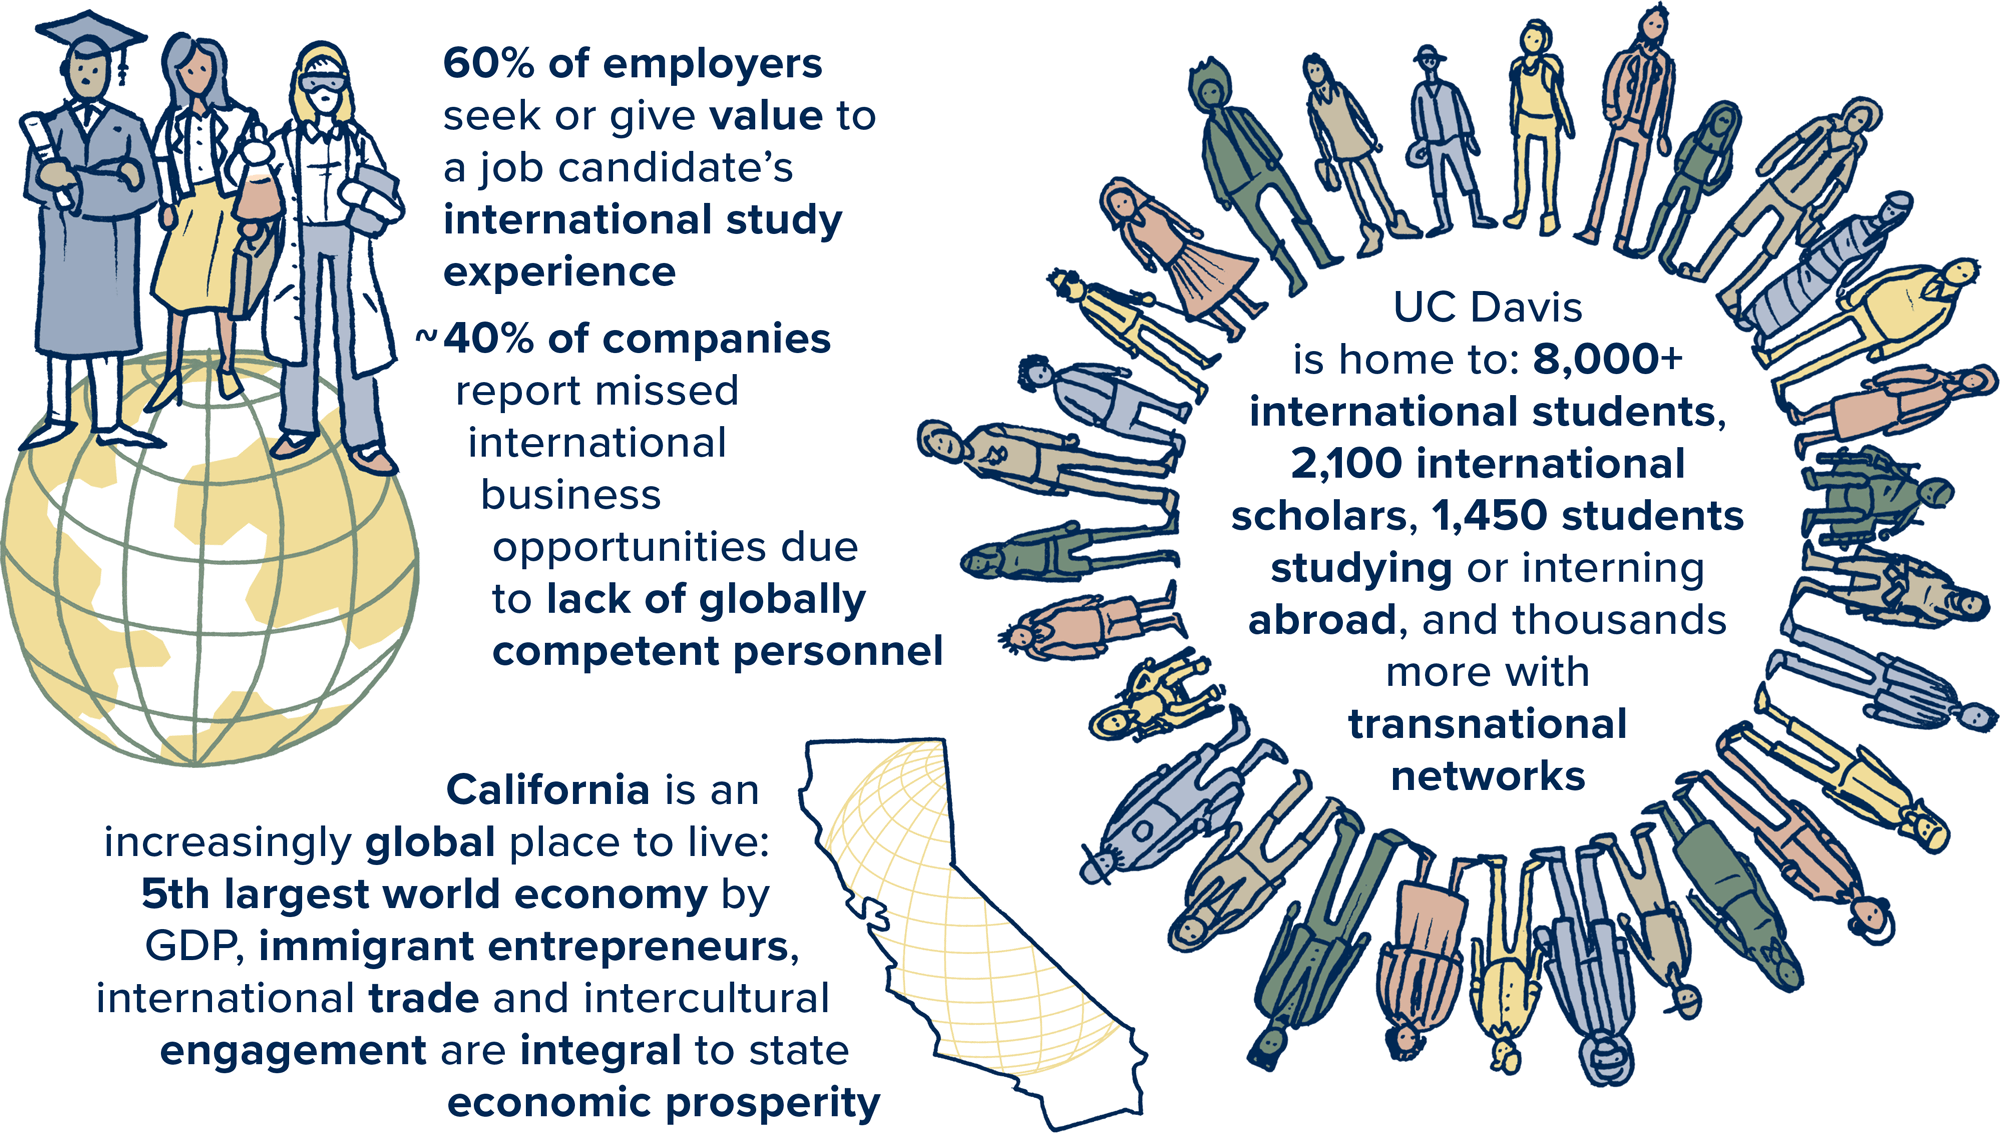 Study abroad statistics for global learning students at UC Davis, preparing for global education and service learning opportunities.